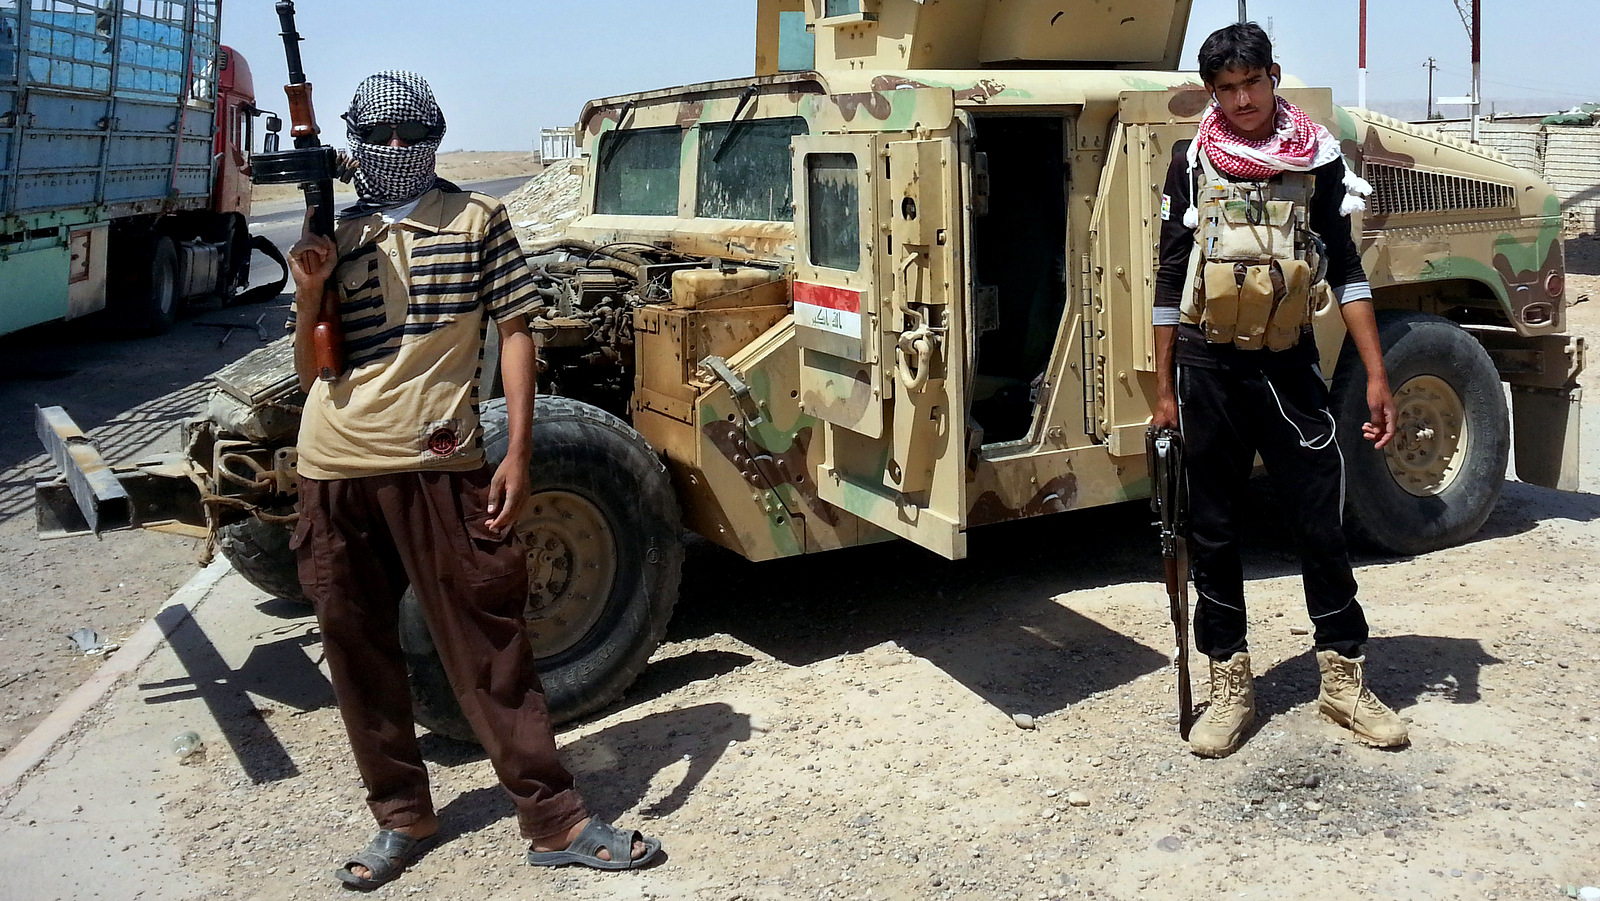 ISIS militants stand with a captured American Humvee, given to the Iraqi Army and captured by ISIS, June 19, 2014. (AP Photo)